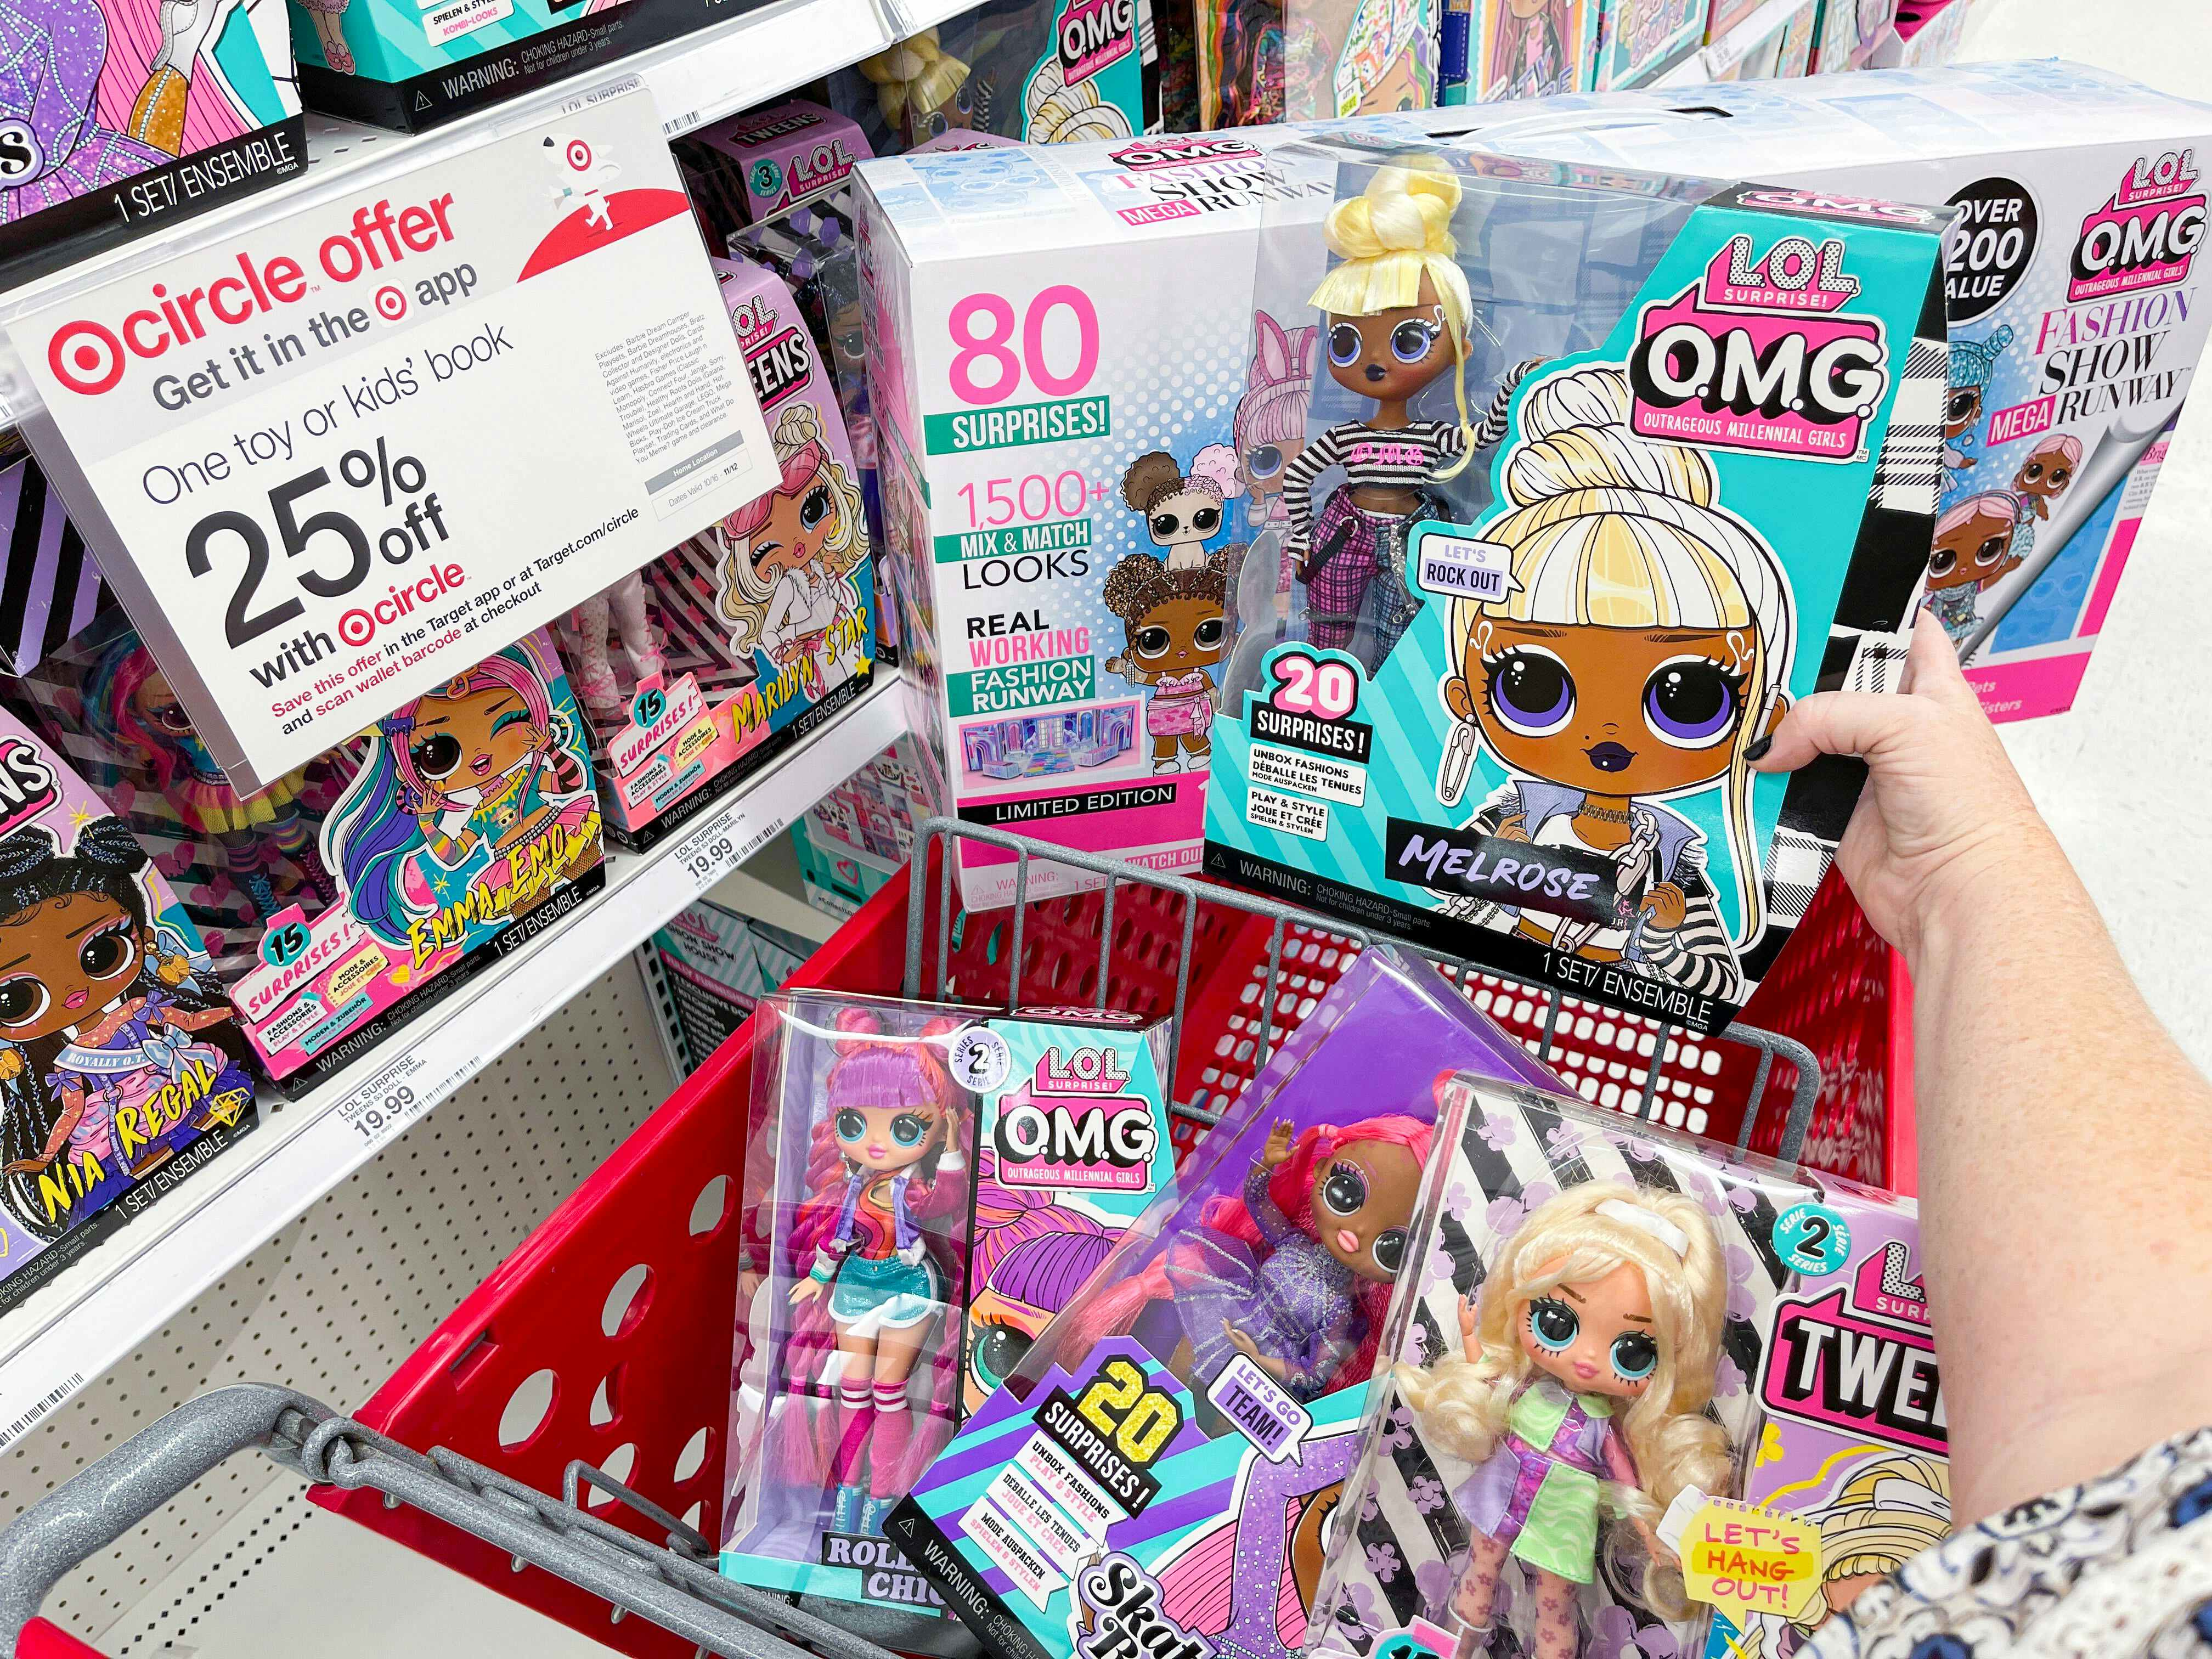 A person holding an LOL Surprise doll over a cart full of more dolls next to a sign for the Target Toy Book sale for 25% off a toy or book.